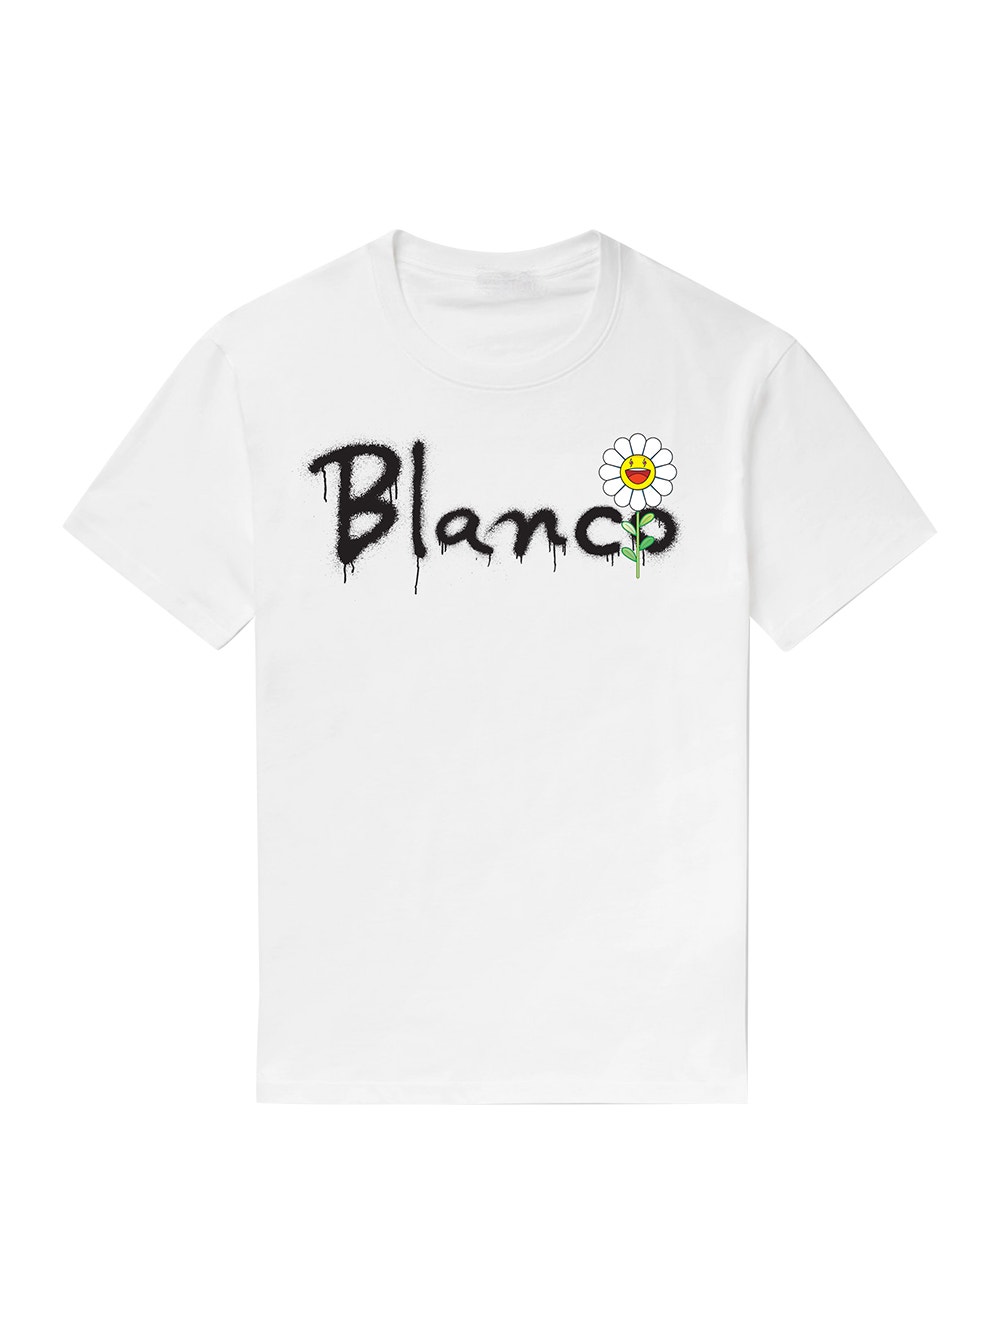 Blanco Spray Paint T-shirt | The Webster